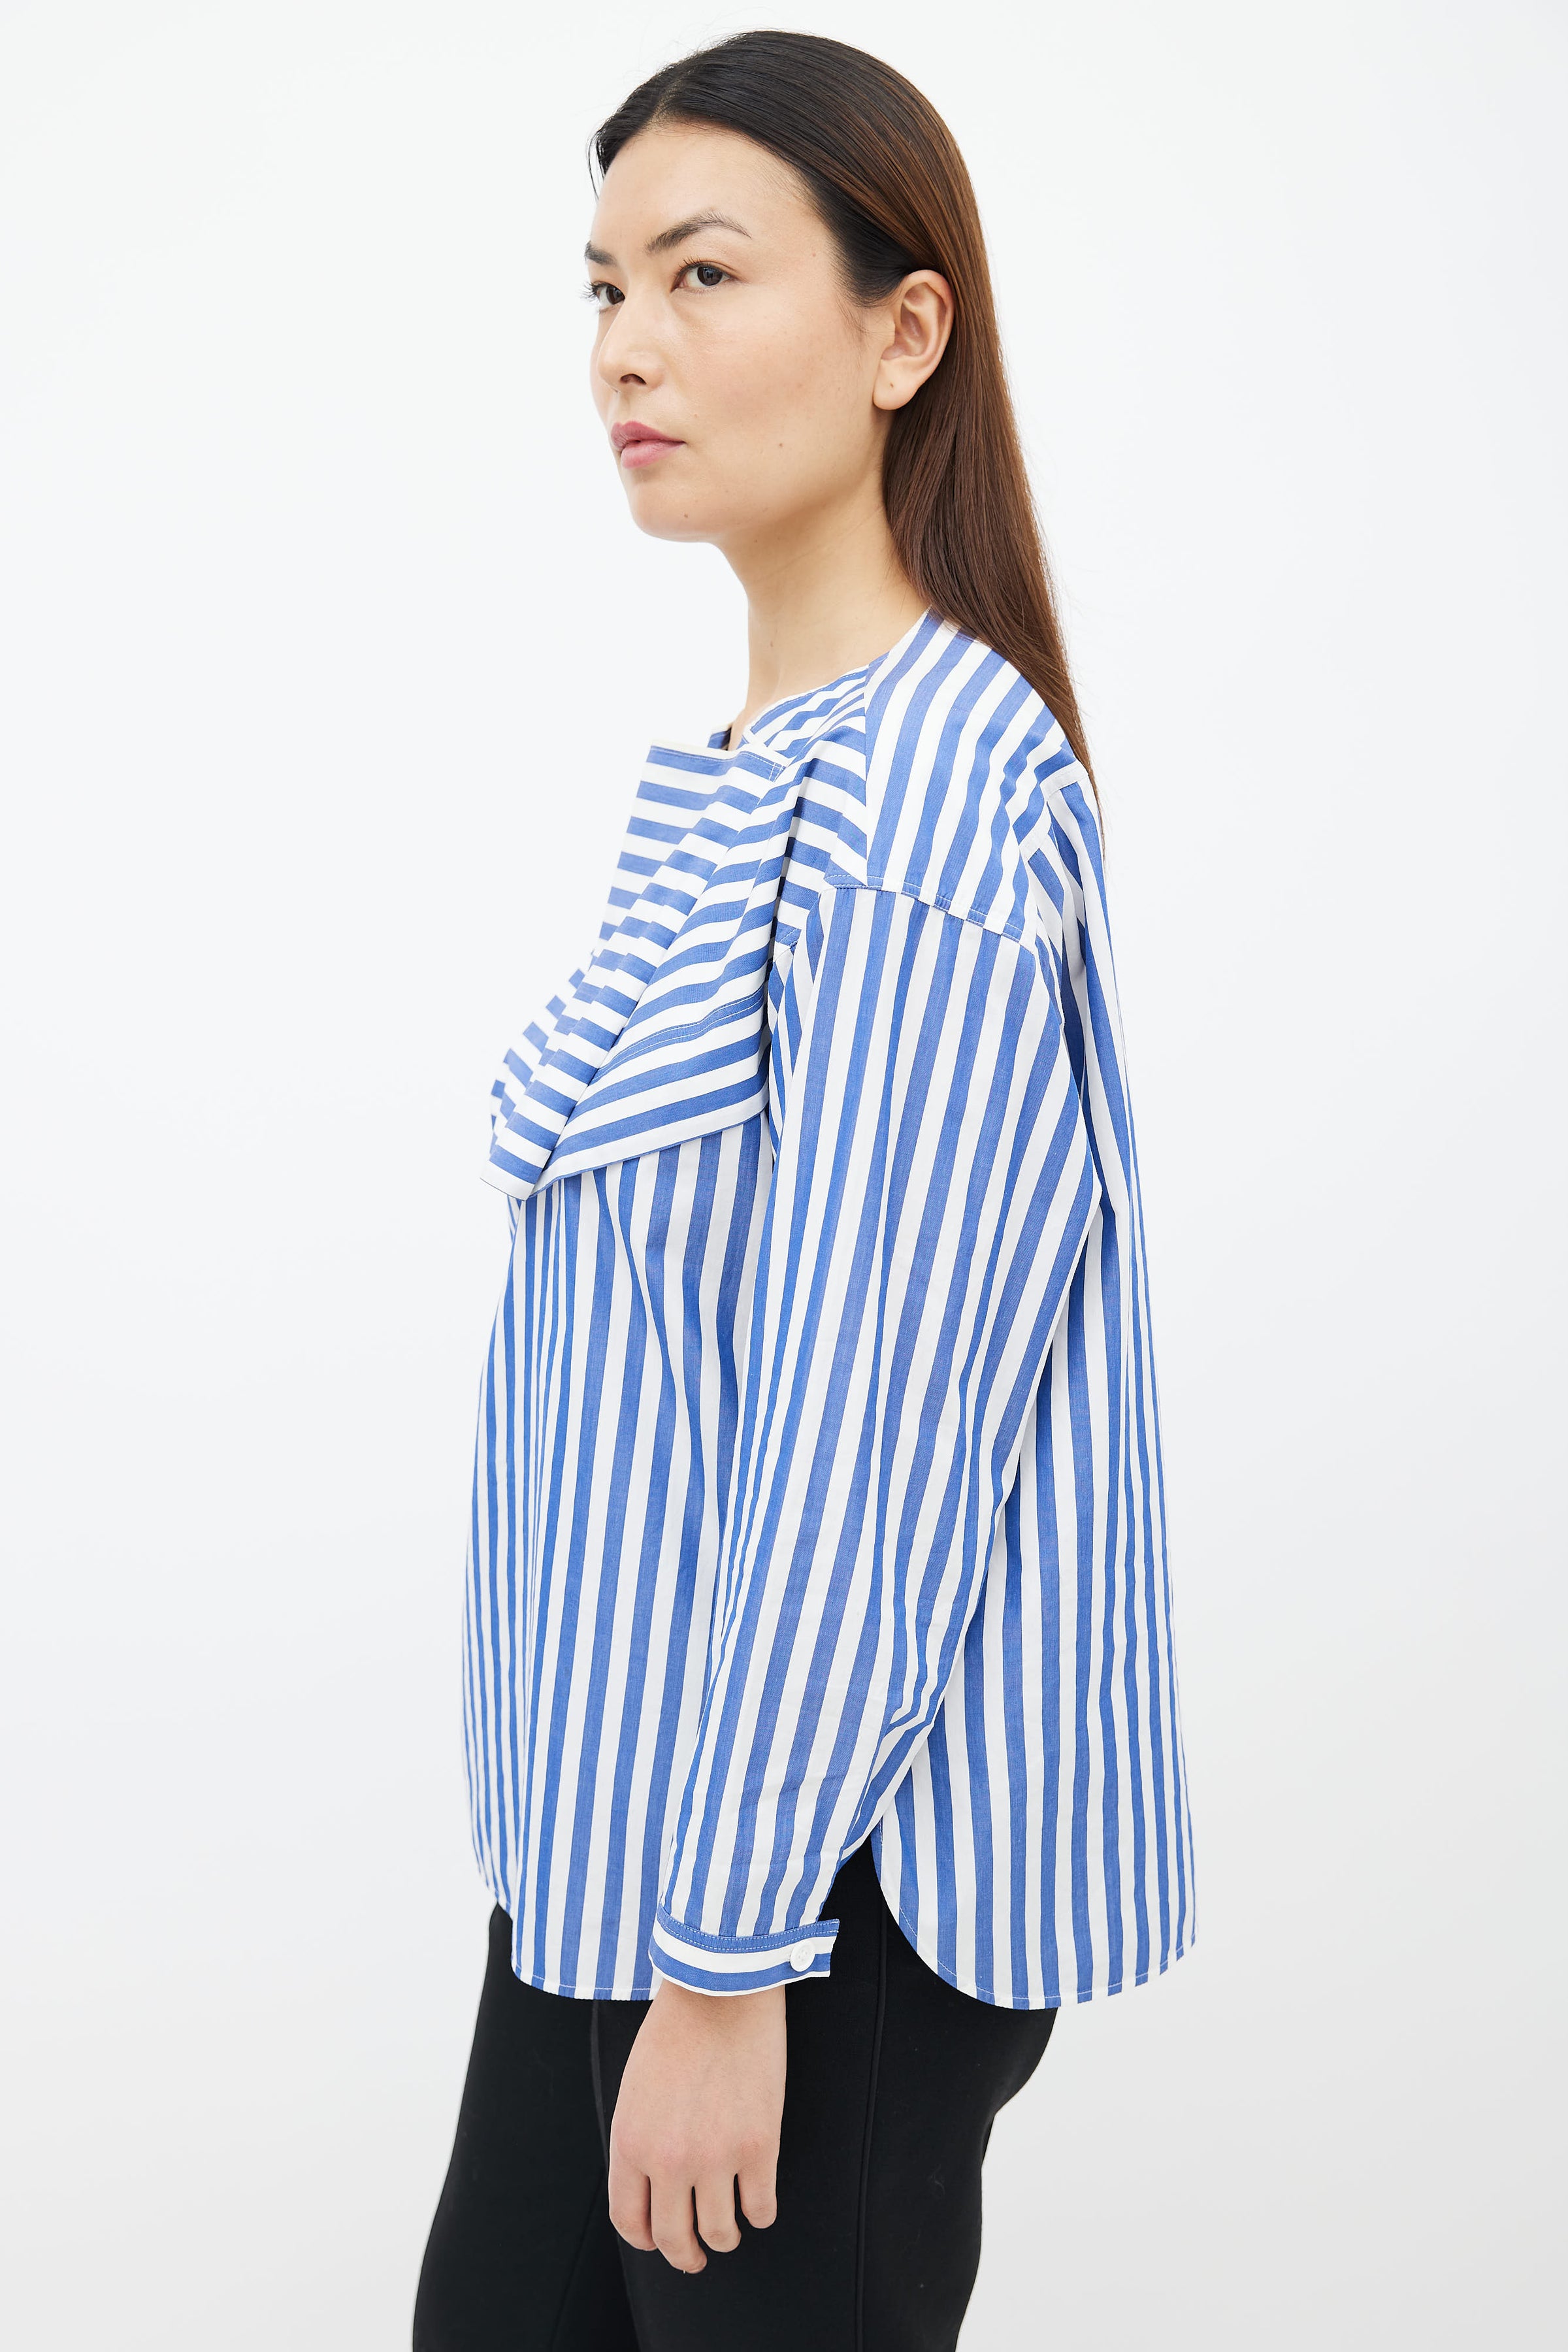 Celine Striped top with brand logo 88523501, Original — Buy from